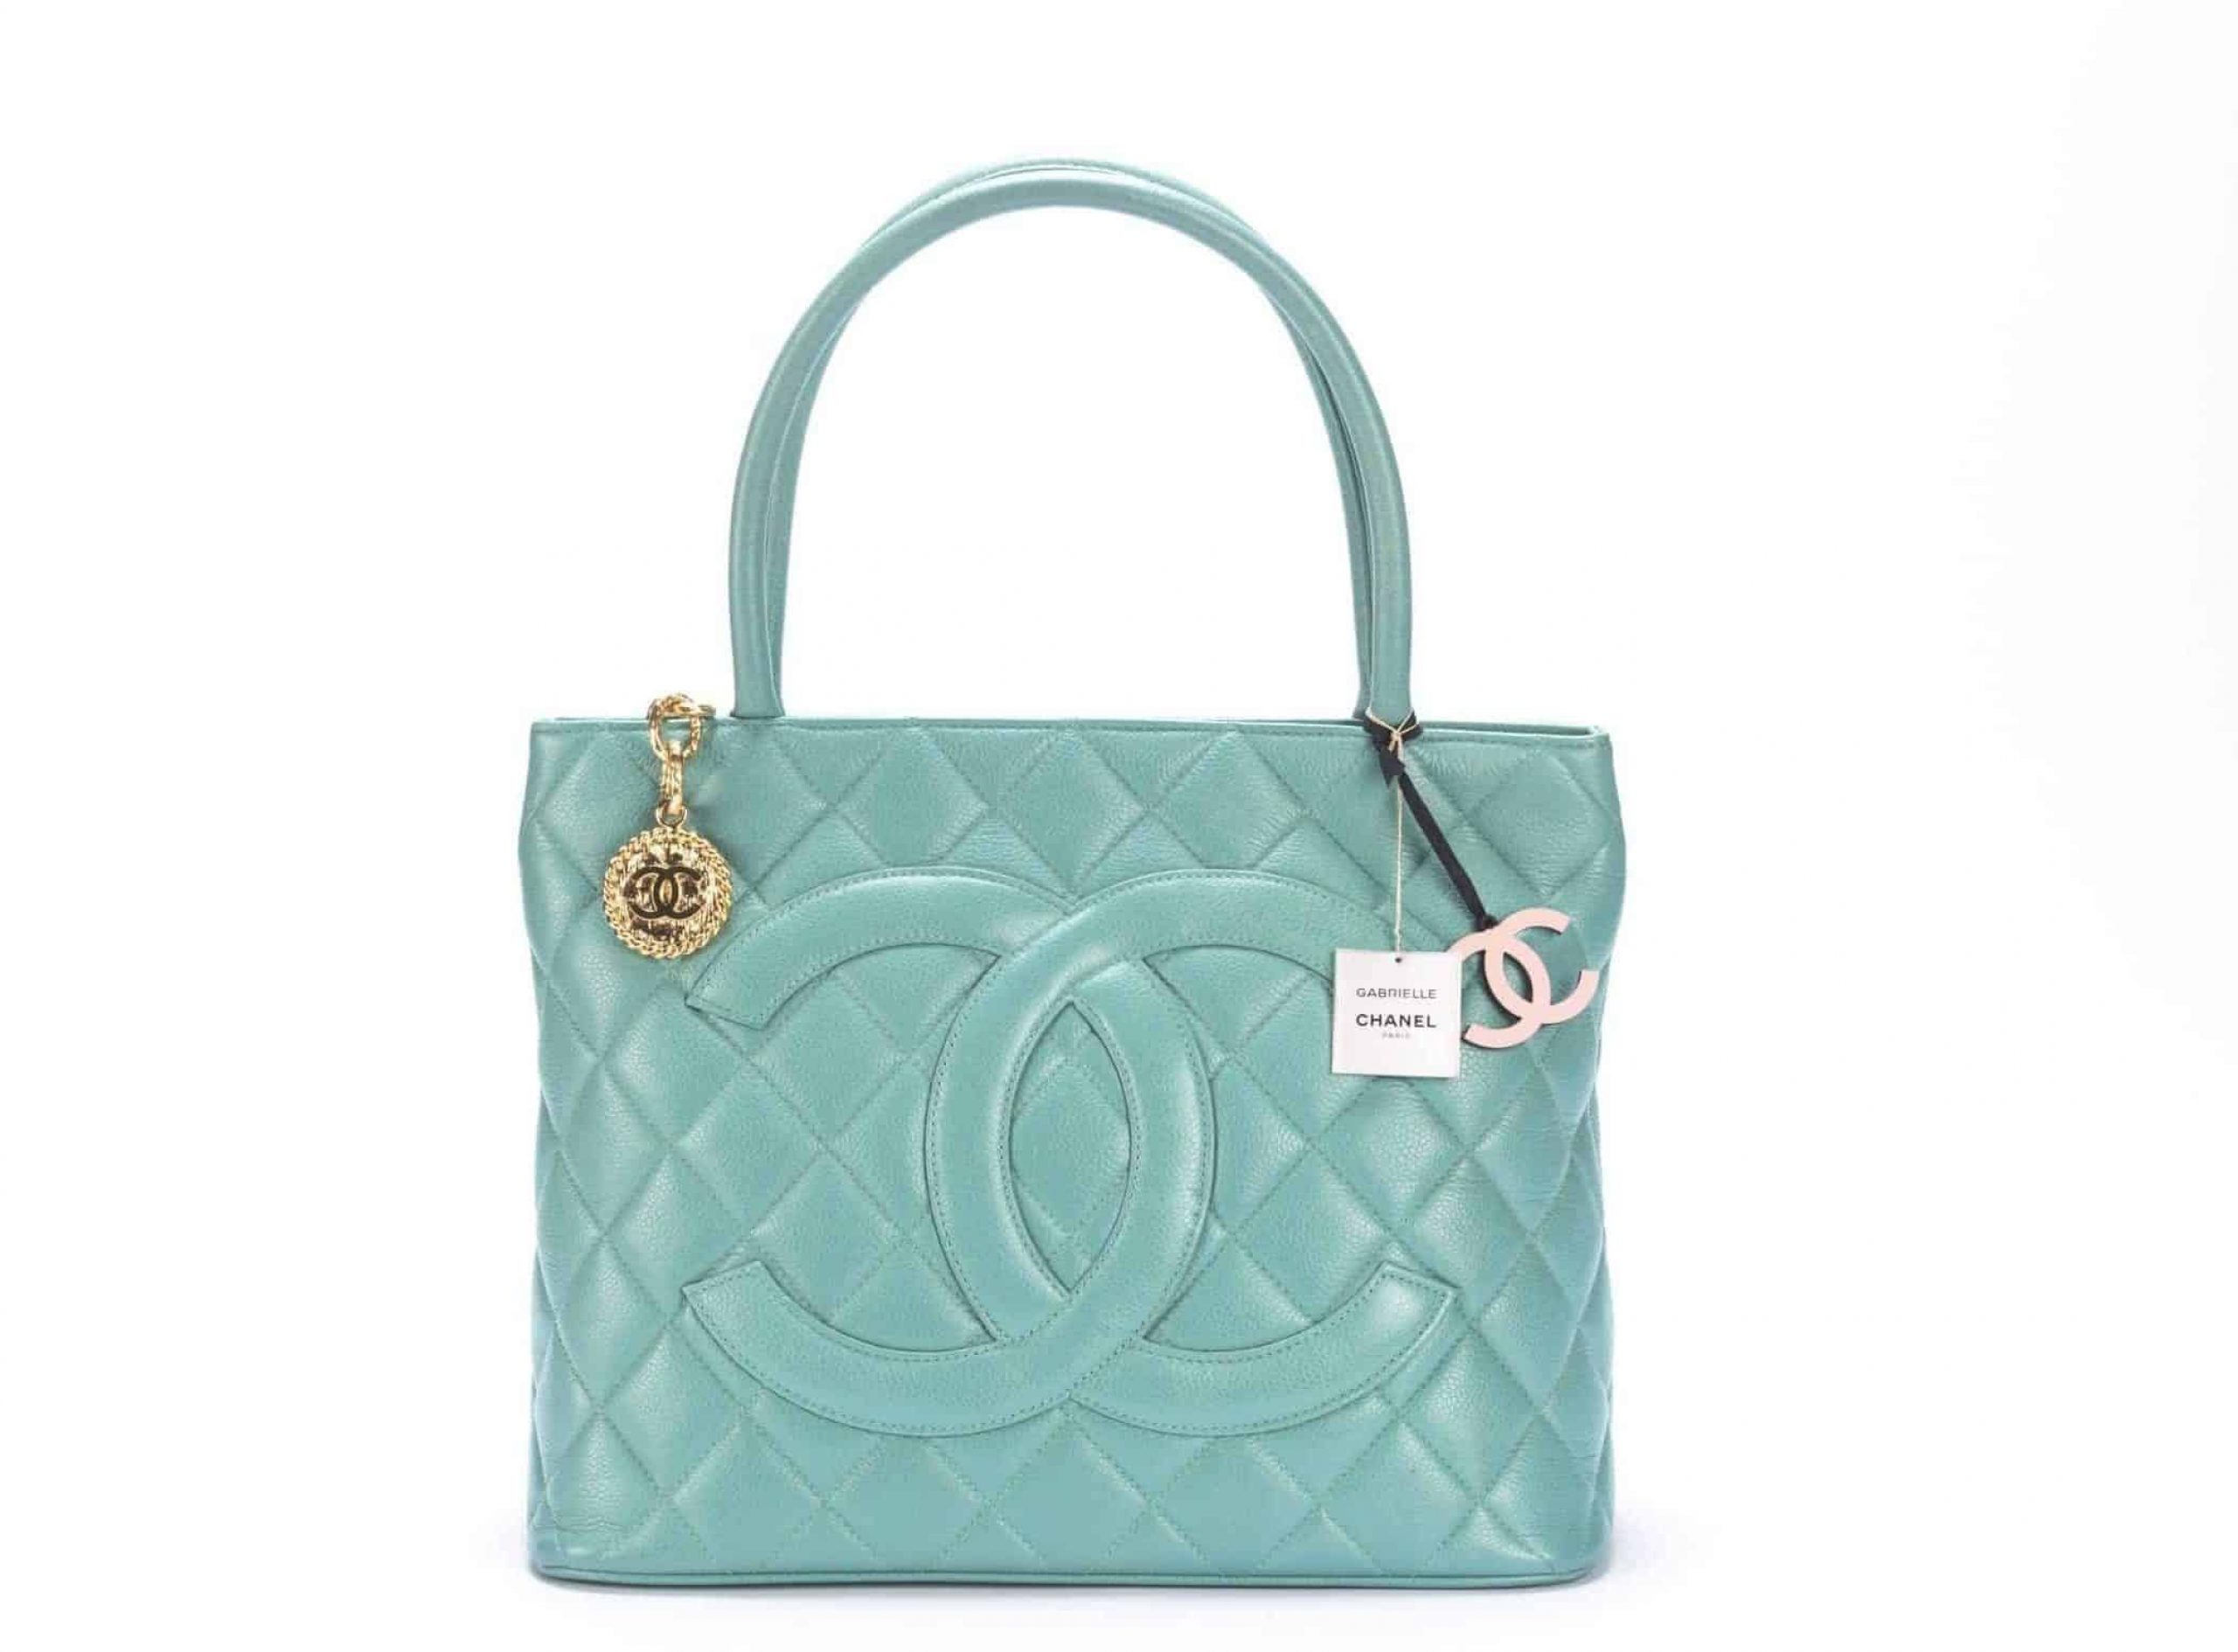 Chanel Caviar Medallion with Gold Hardware in Turquoise - 1